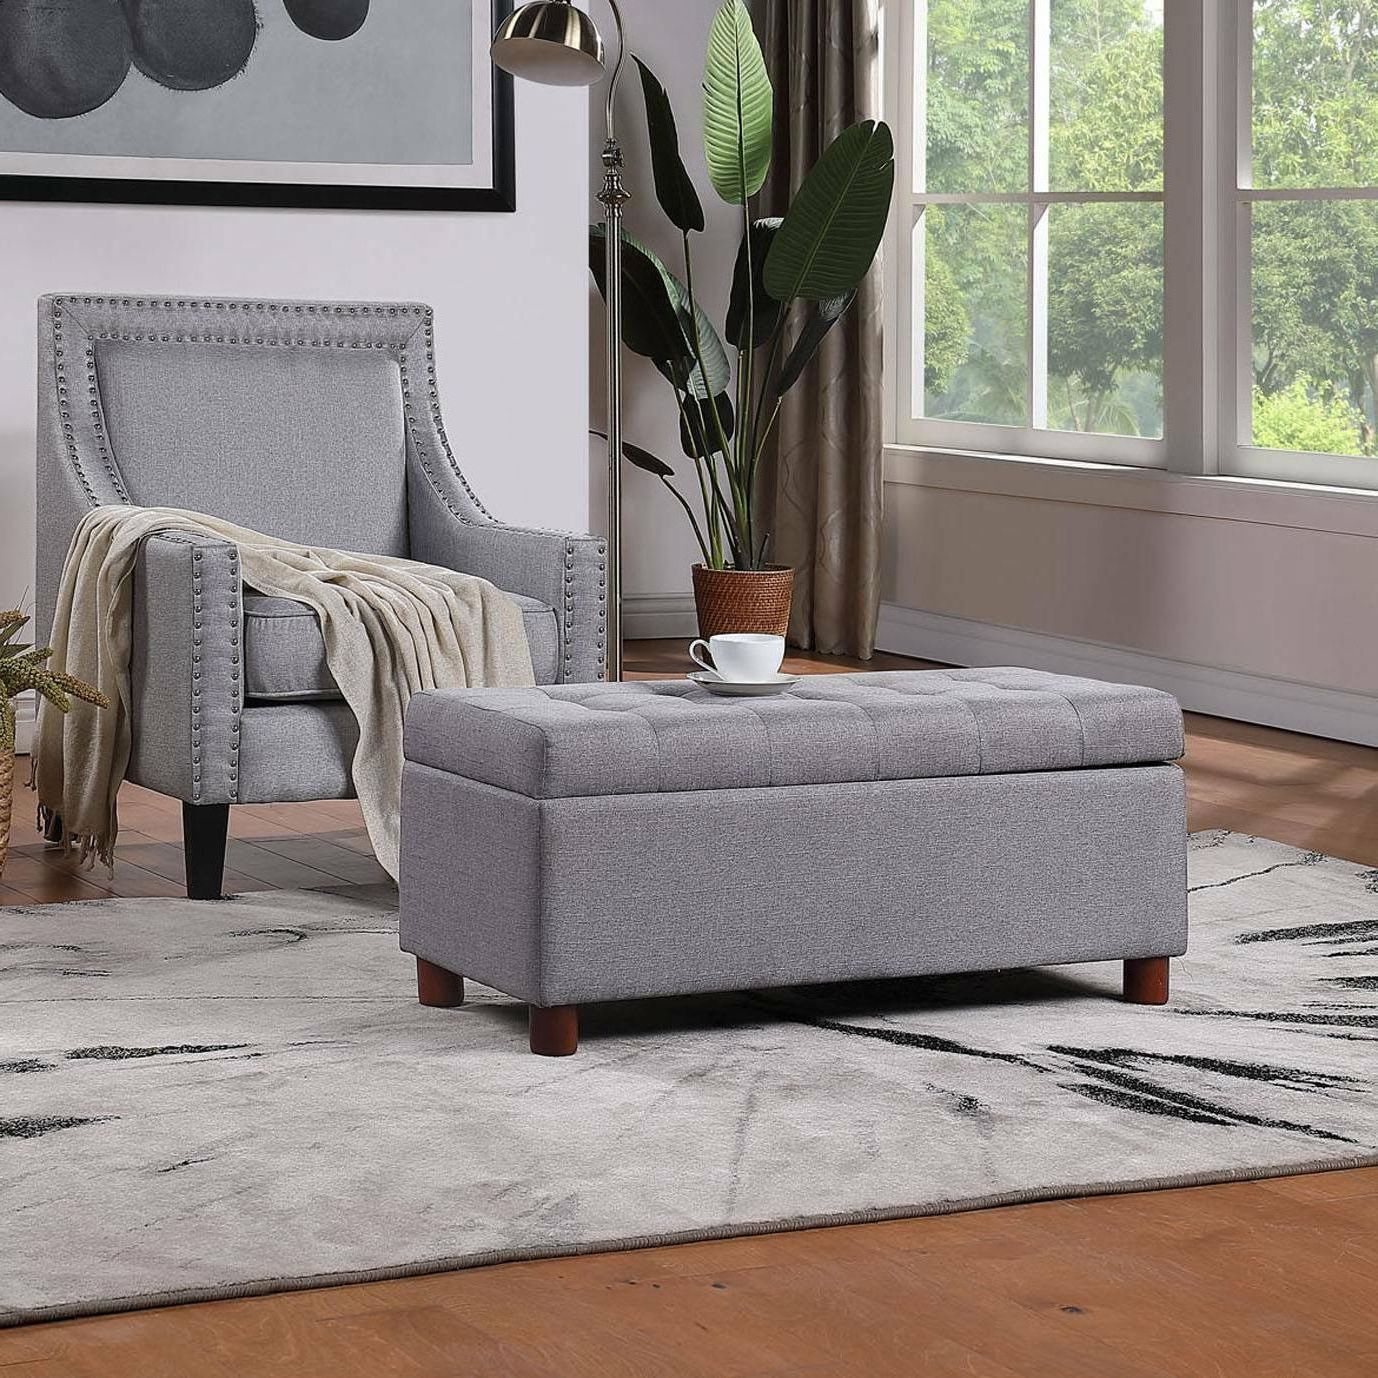 Trendy Gray Fabric Tufted Oval Ottomans For 39'' Rectangular Storage Bench Tufted Linen Fabric Ottom (View 6 of 10)